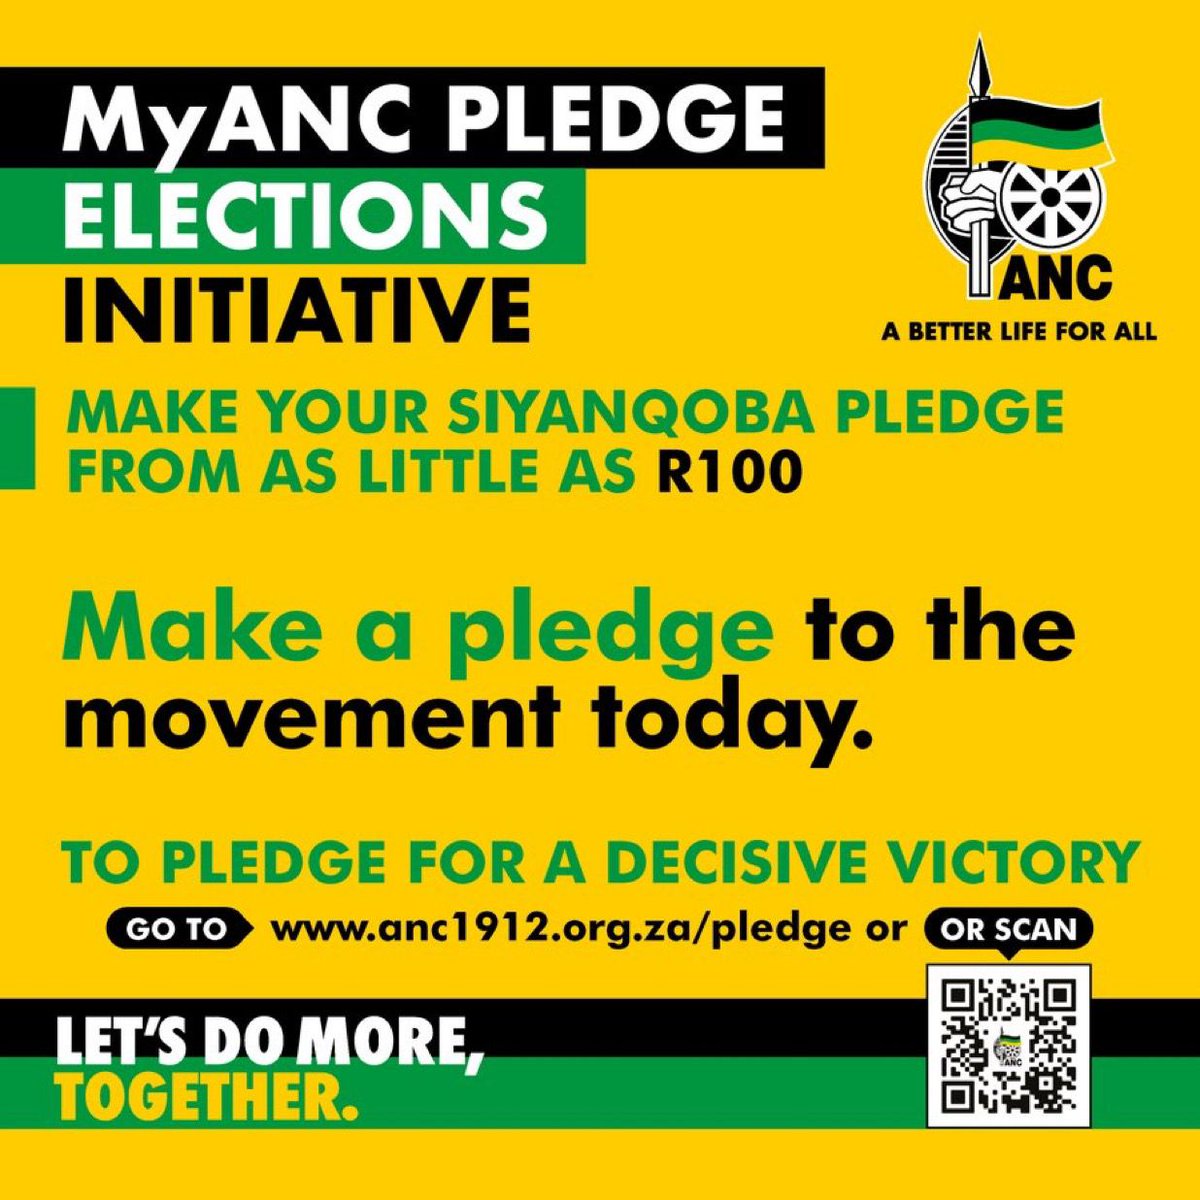 MyANC PLEDGE ELECTIONS INITIATIVE! ⚫🟢🟡

MAKE YOUR SIYANQOBA PLEDGE FROM AS LITTLE AS R100! MAKE A PLEDGE TO THE MOVEMENT TODAY! TO PLEDGE FOR A DECISIVE VICTORY GO TO: anc1912.org.za/pledge  

#VoteANC2024
#LetsDoMoreTogether